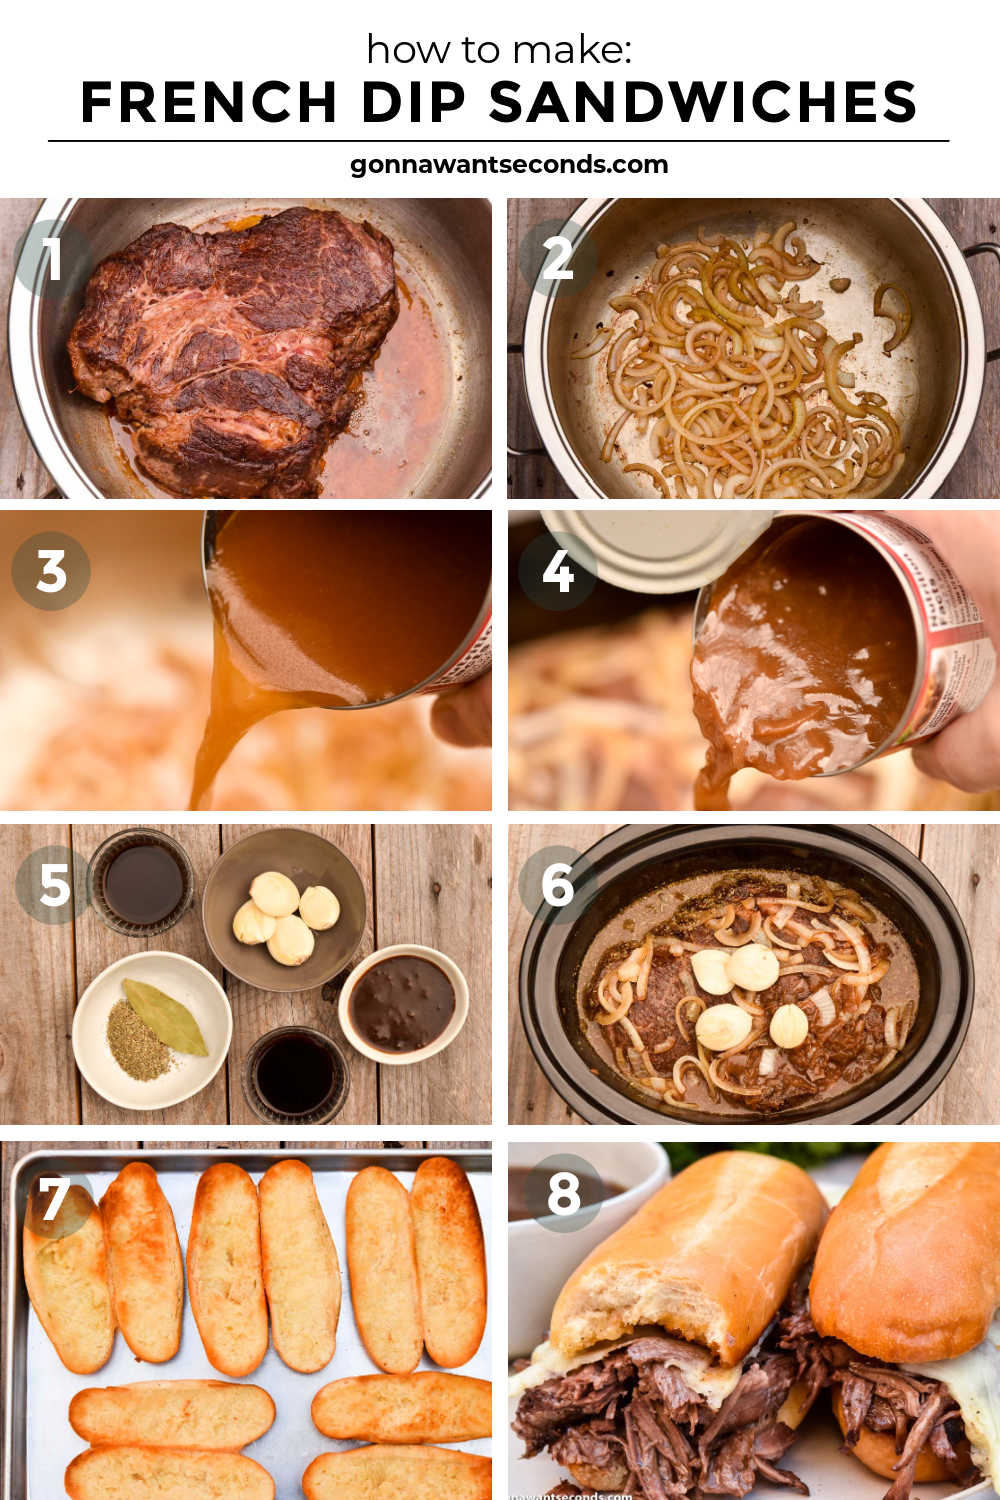 Step by step how to make french dip sandwiches